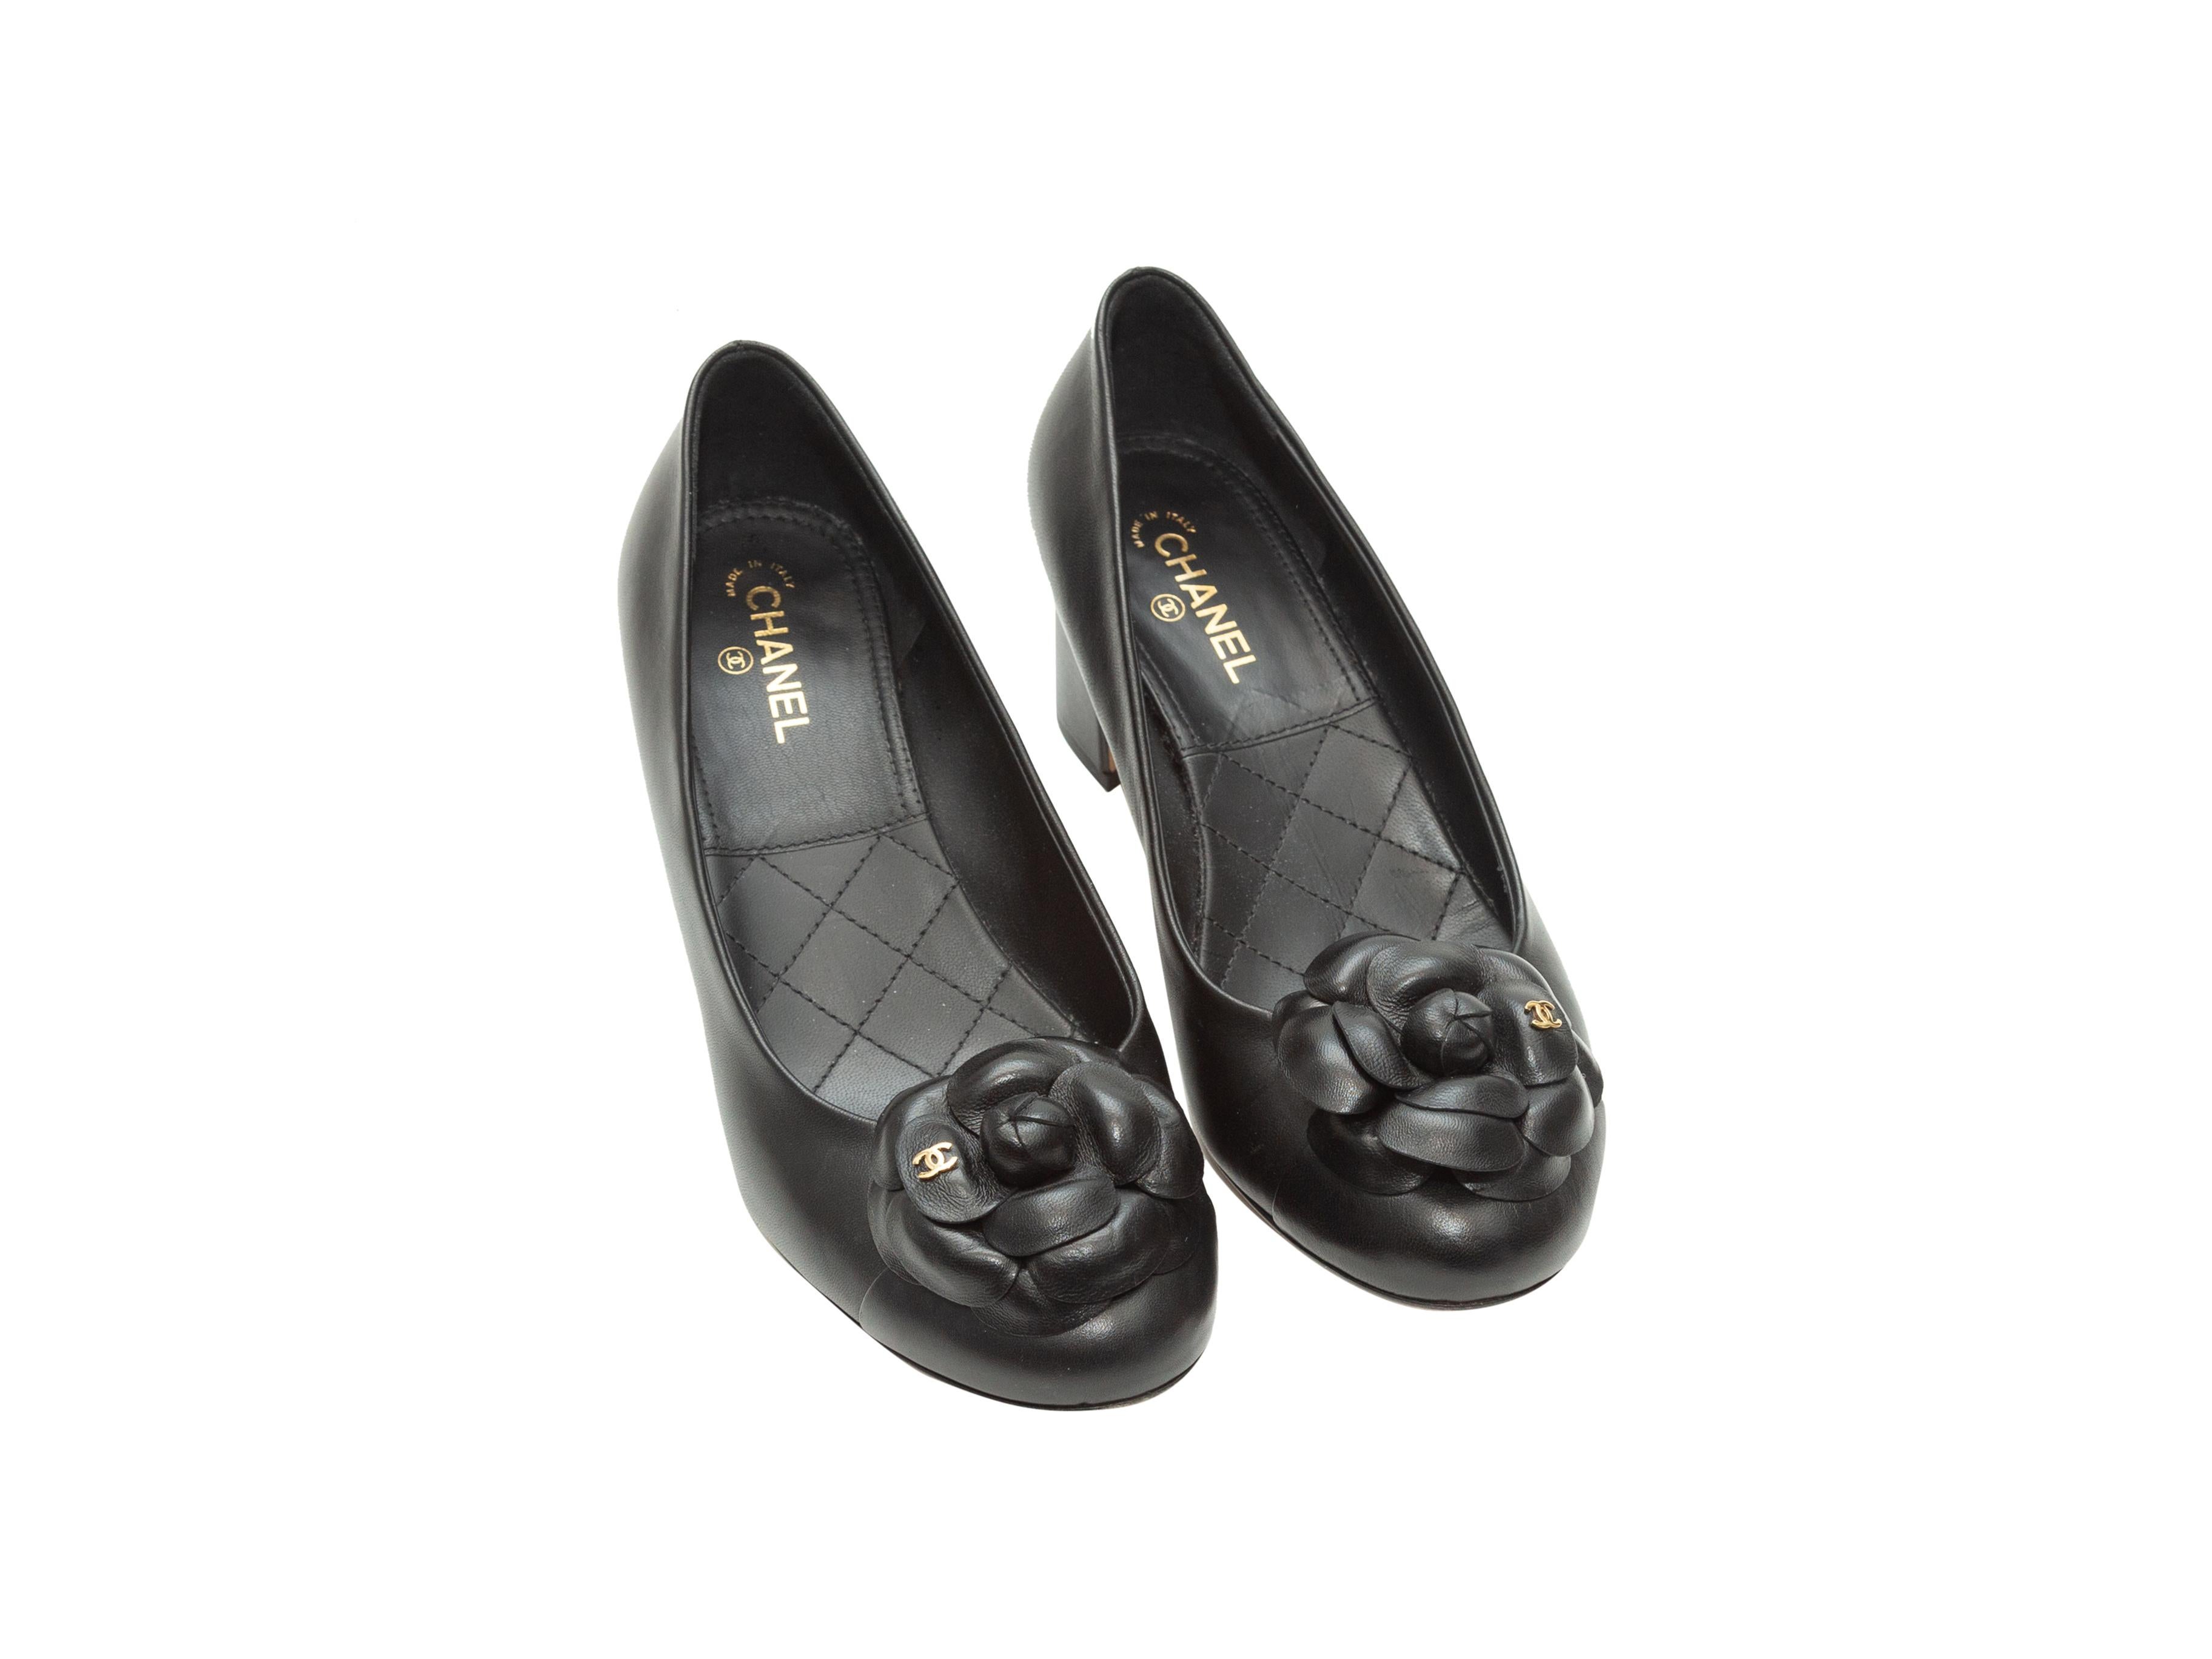 Product details: Black leather round-toe pumps by Chanel. Camelia accents at toes. Block heels. Designer size 39. 2.25